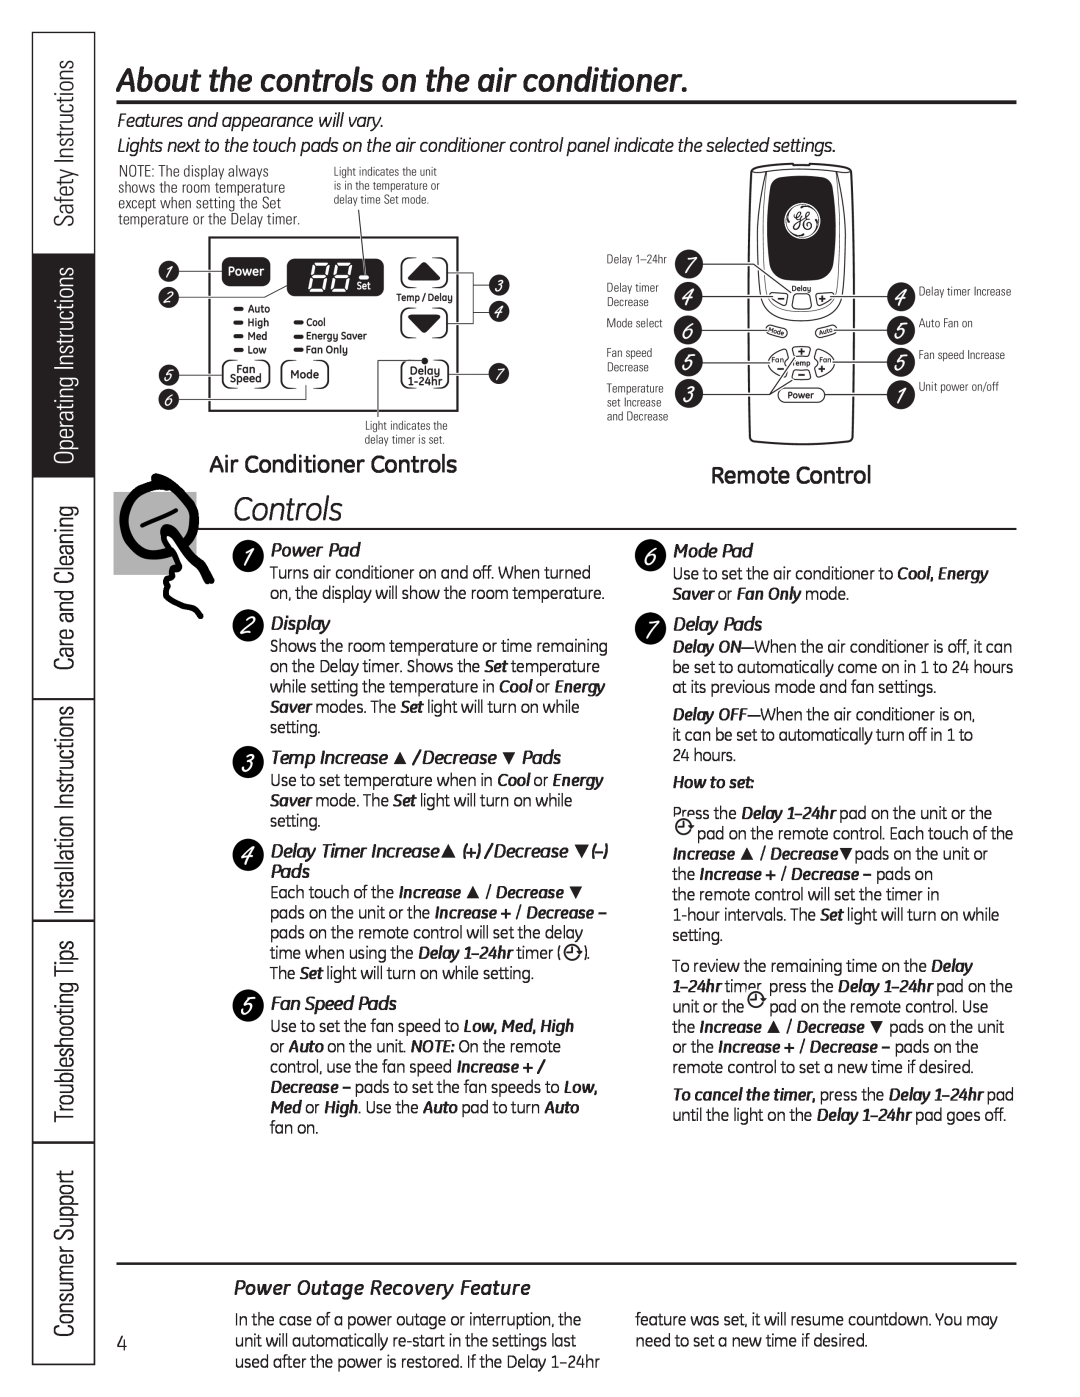 GE AEQ10 About the controls on the air conditioner, Instructions, Air Conditioner Controls, Remote Control, Consumer 